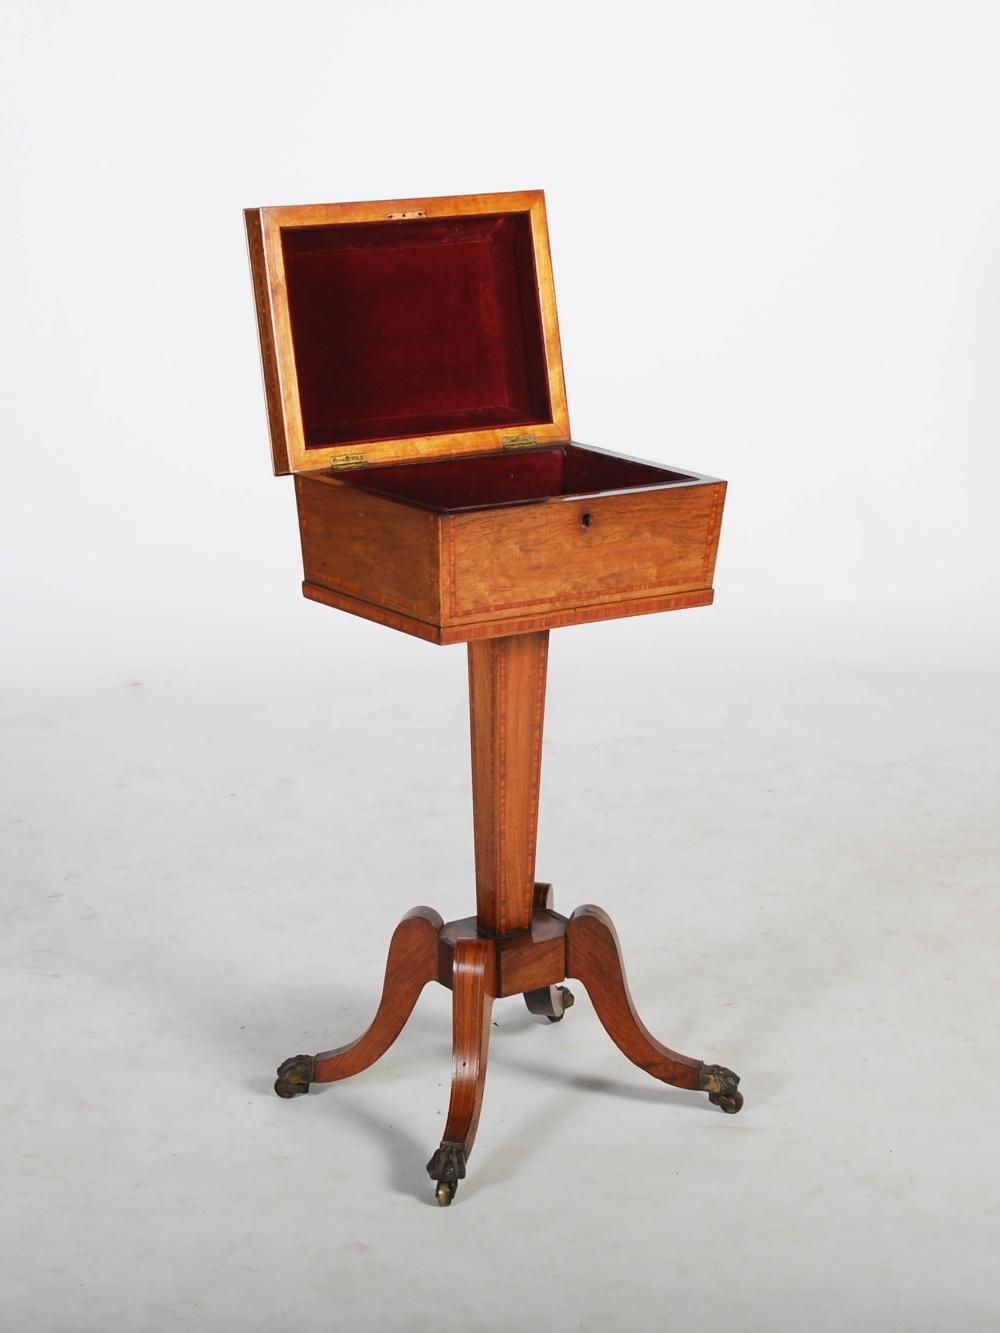 A 19th century rosewood and satinwood banded tea poy, the sarcophagus shaped top with a hinged cover - Image 2 of 3